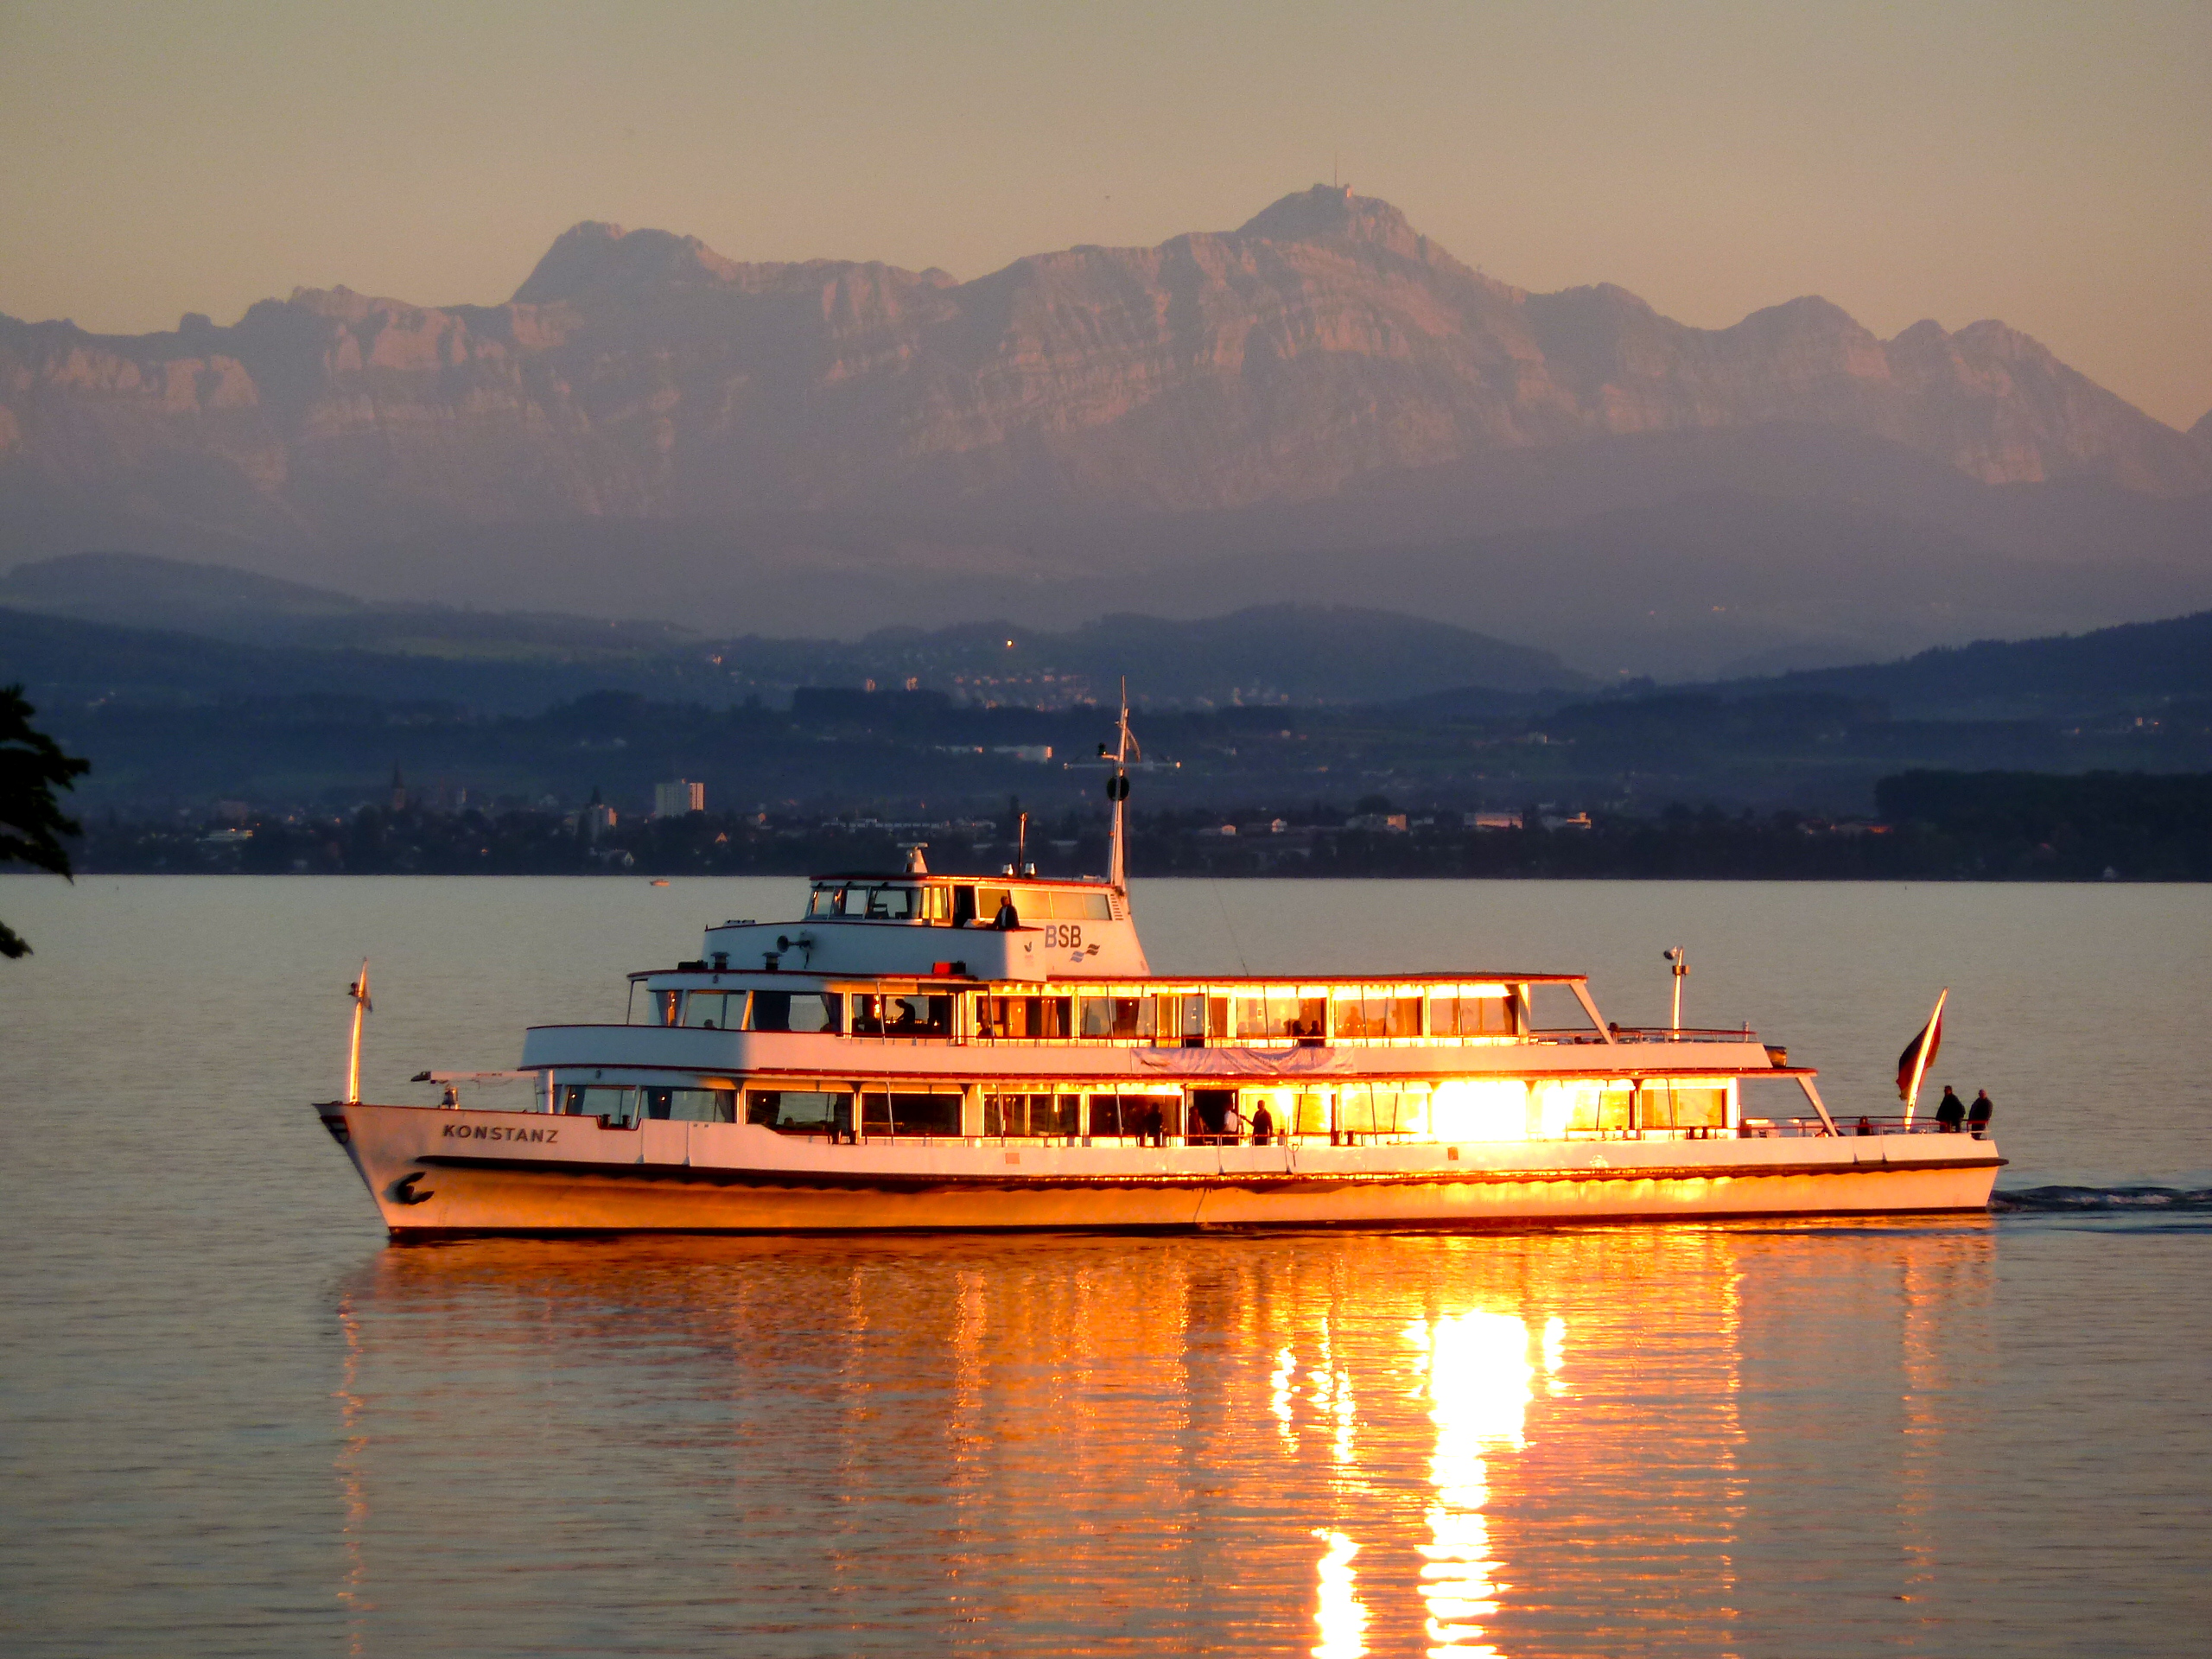 Abendschiff vor dem Säntis-Massiv -- By Ameichle (Own work) [CC BY-SA 3.0 (http://creativecommons.org/licenses/by-sa/3.0)], via Wikimedia Commons